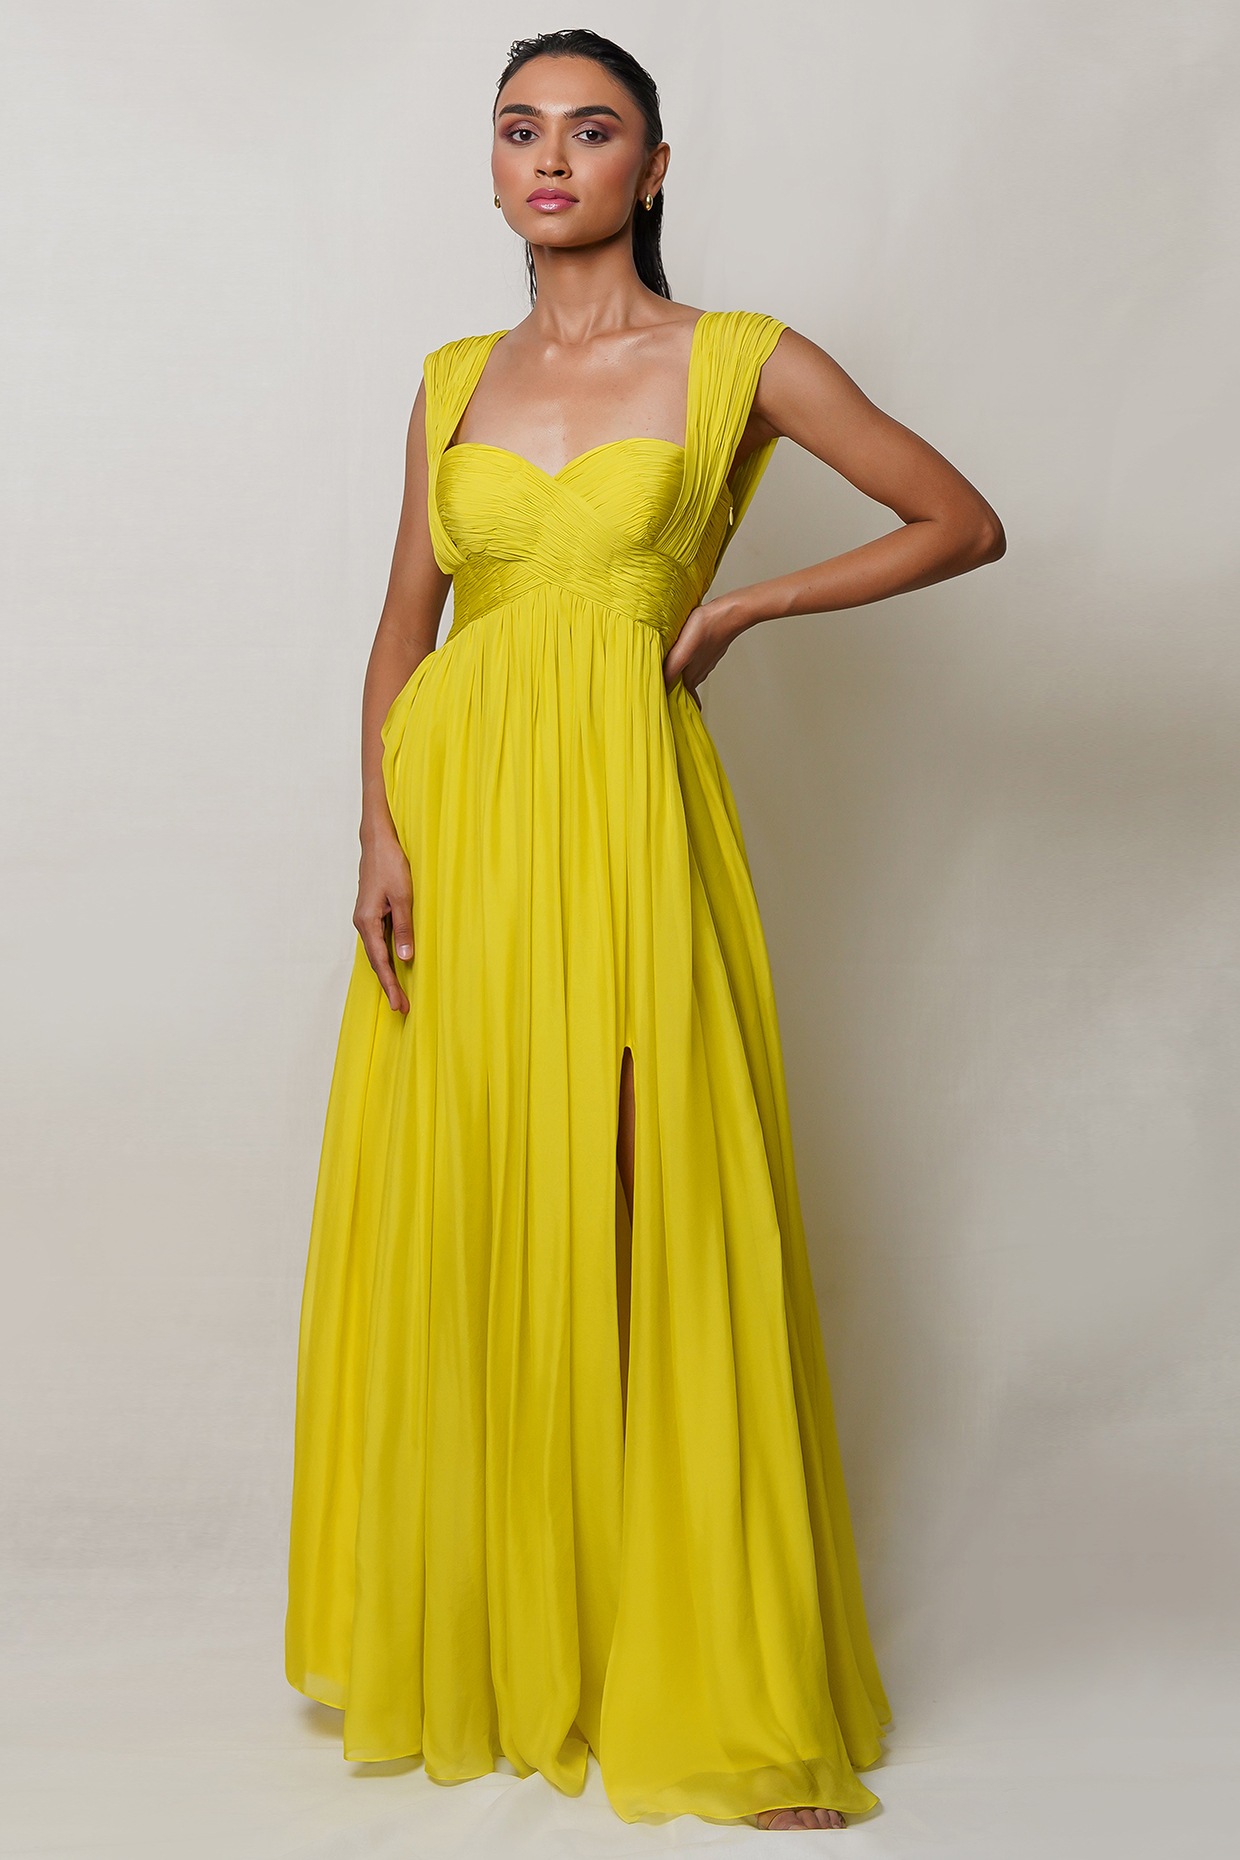 BMbridal Modest High-Neck Yellow Chiffon Affordable Bridesmaid Dresses  Online | BmBridal